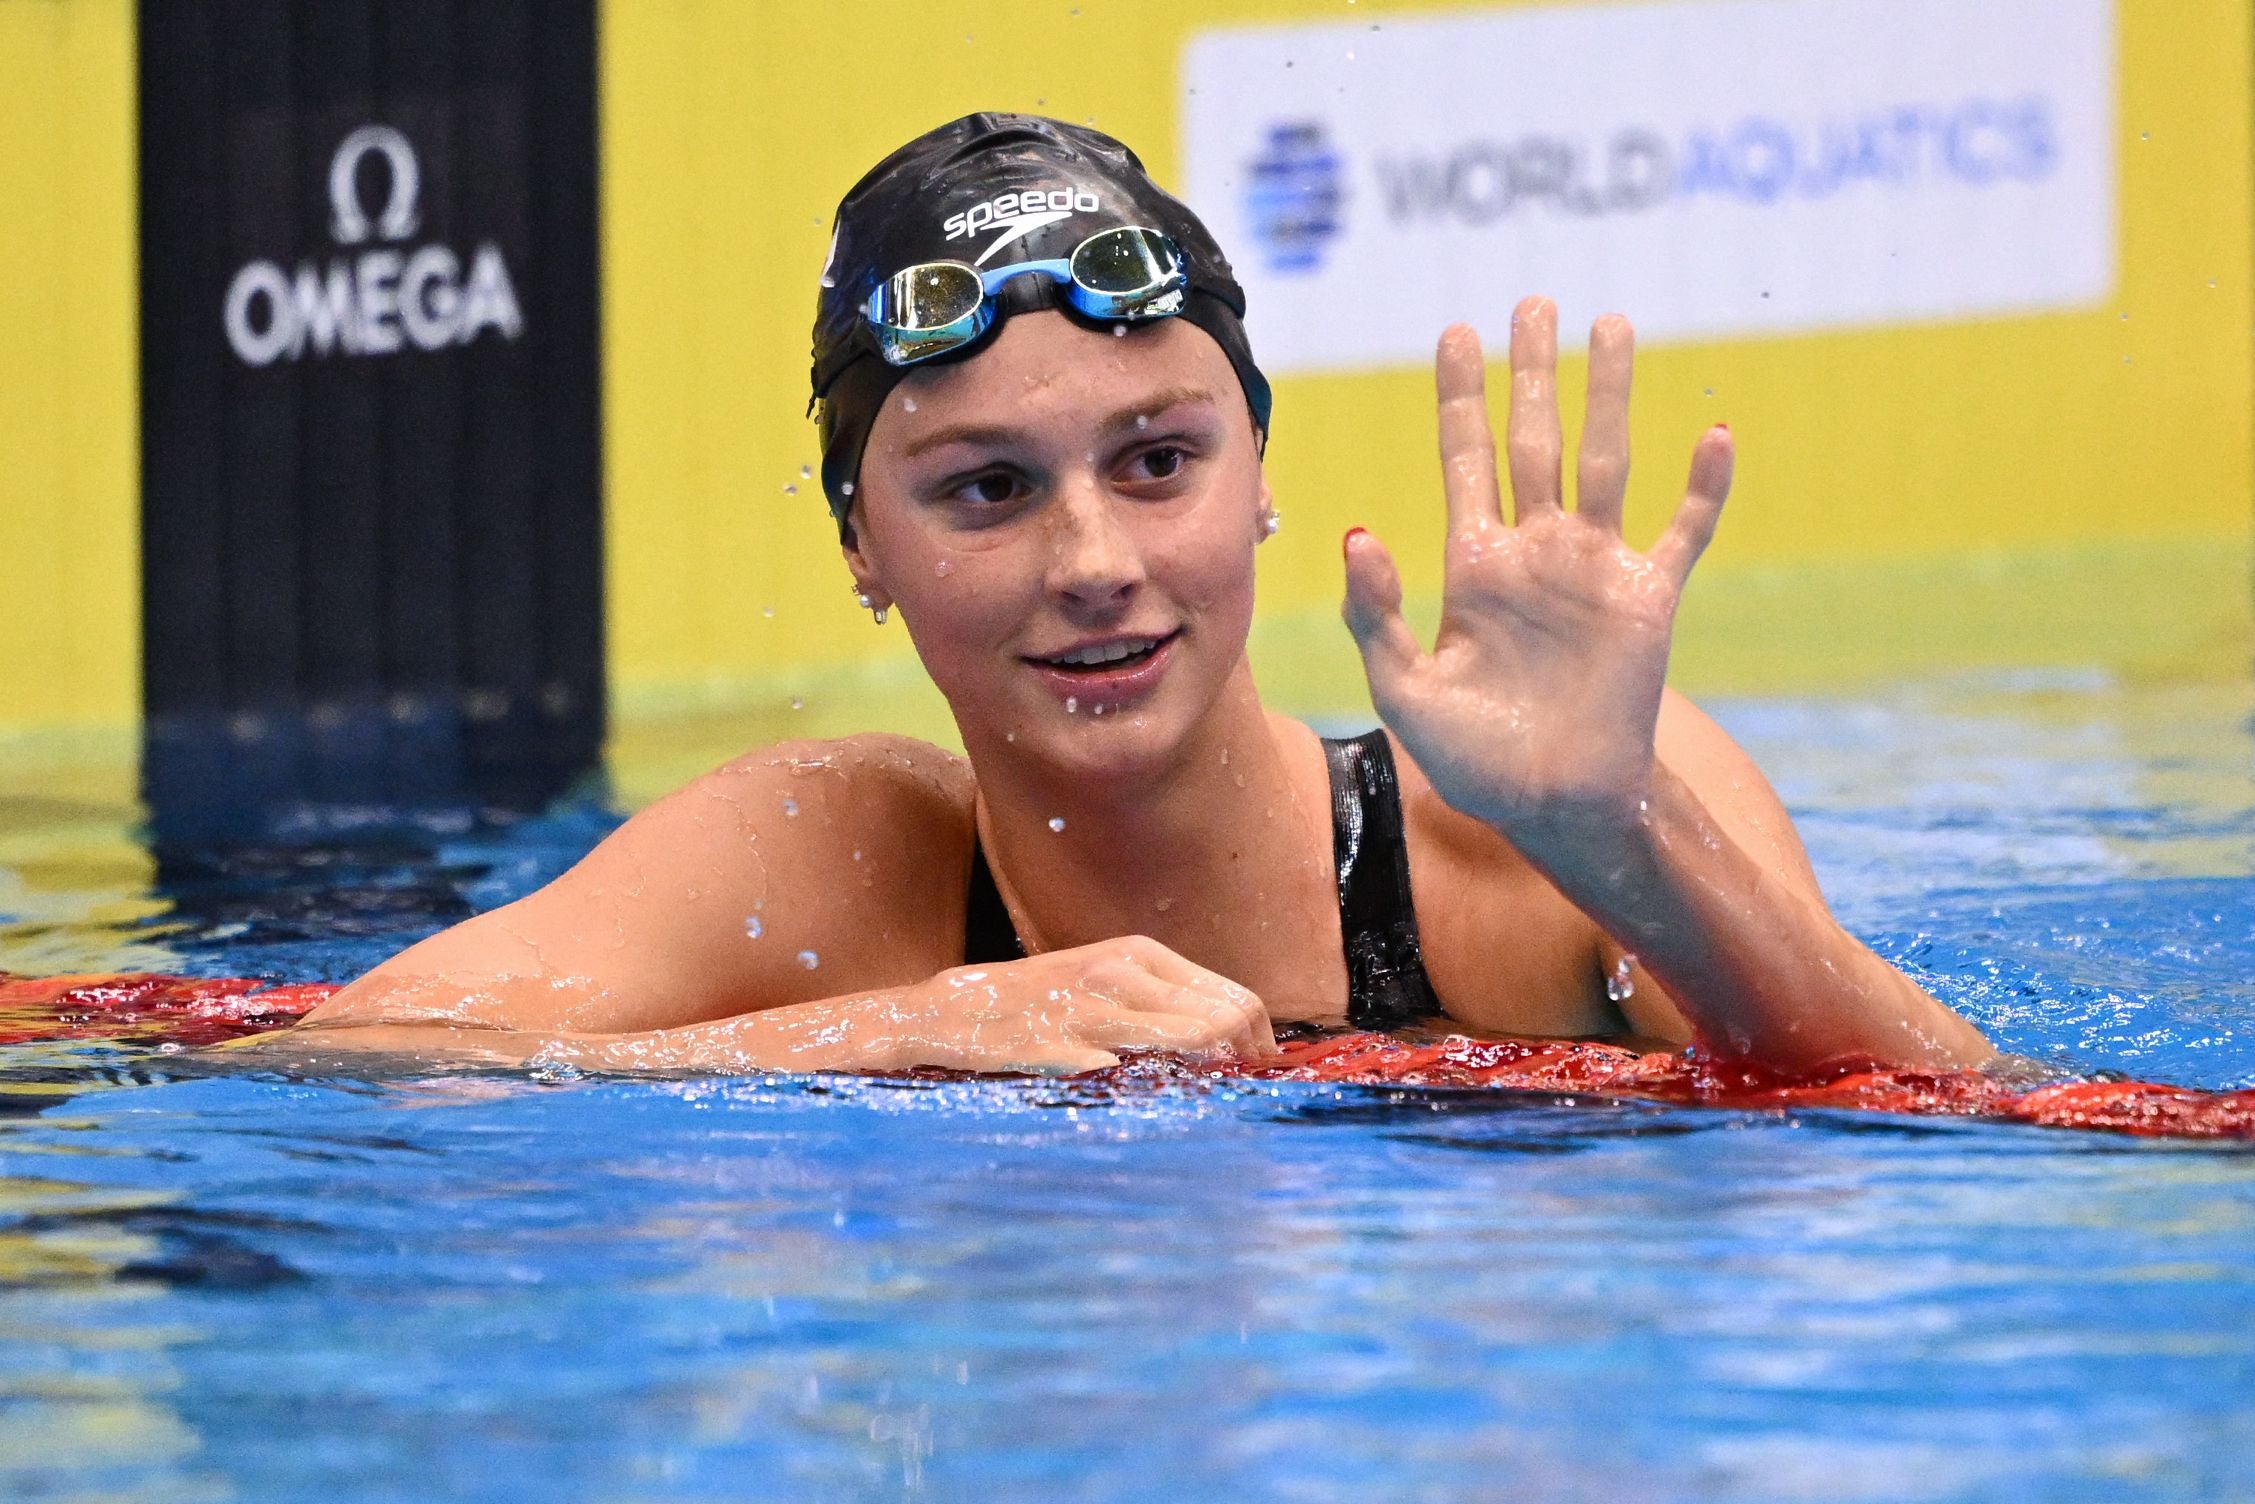 Sixteen-year-old Summer McIntosh claimed a second title of the World Championship